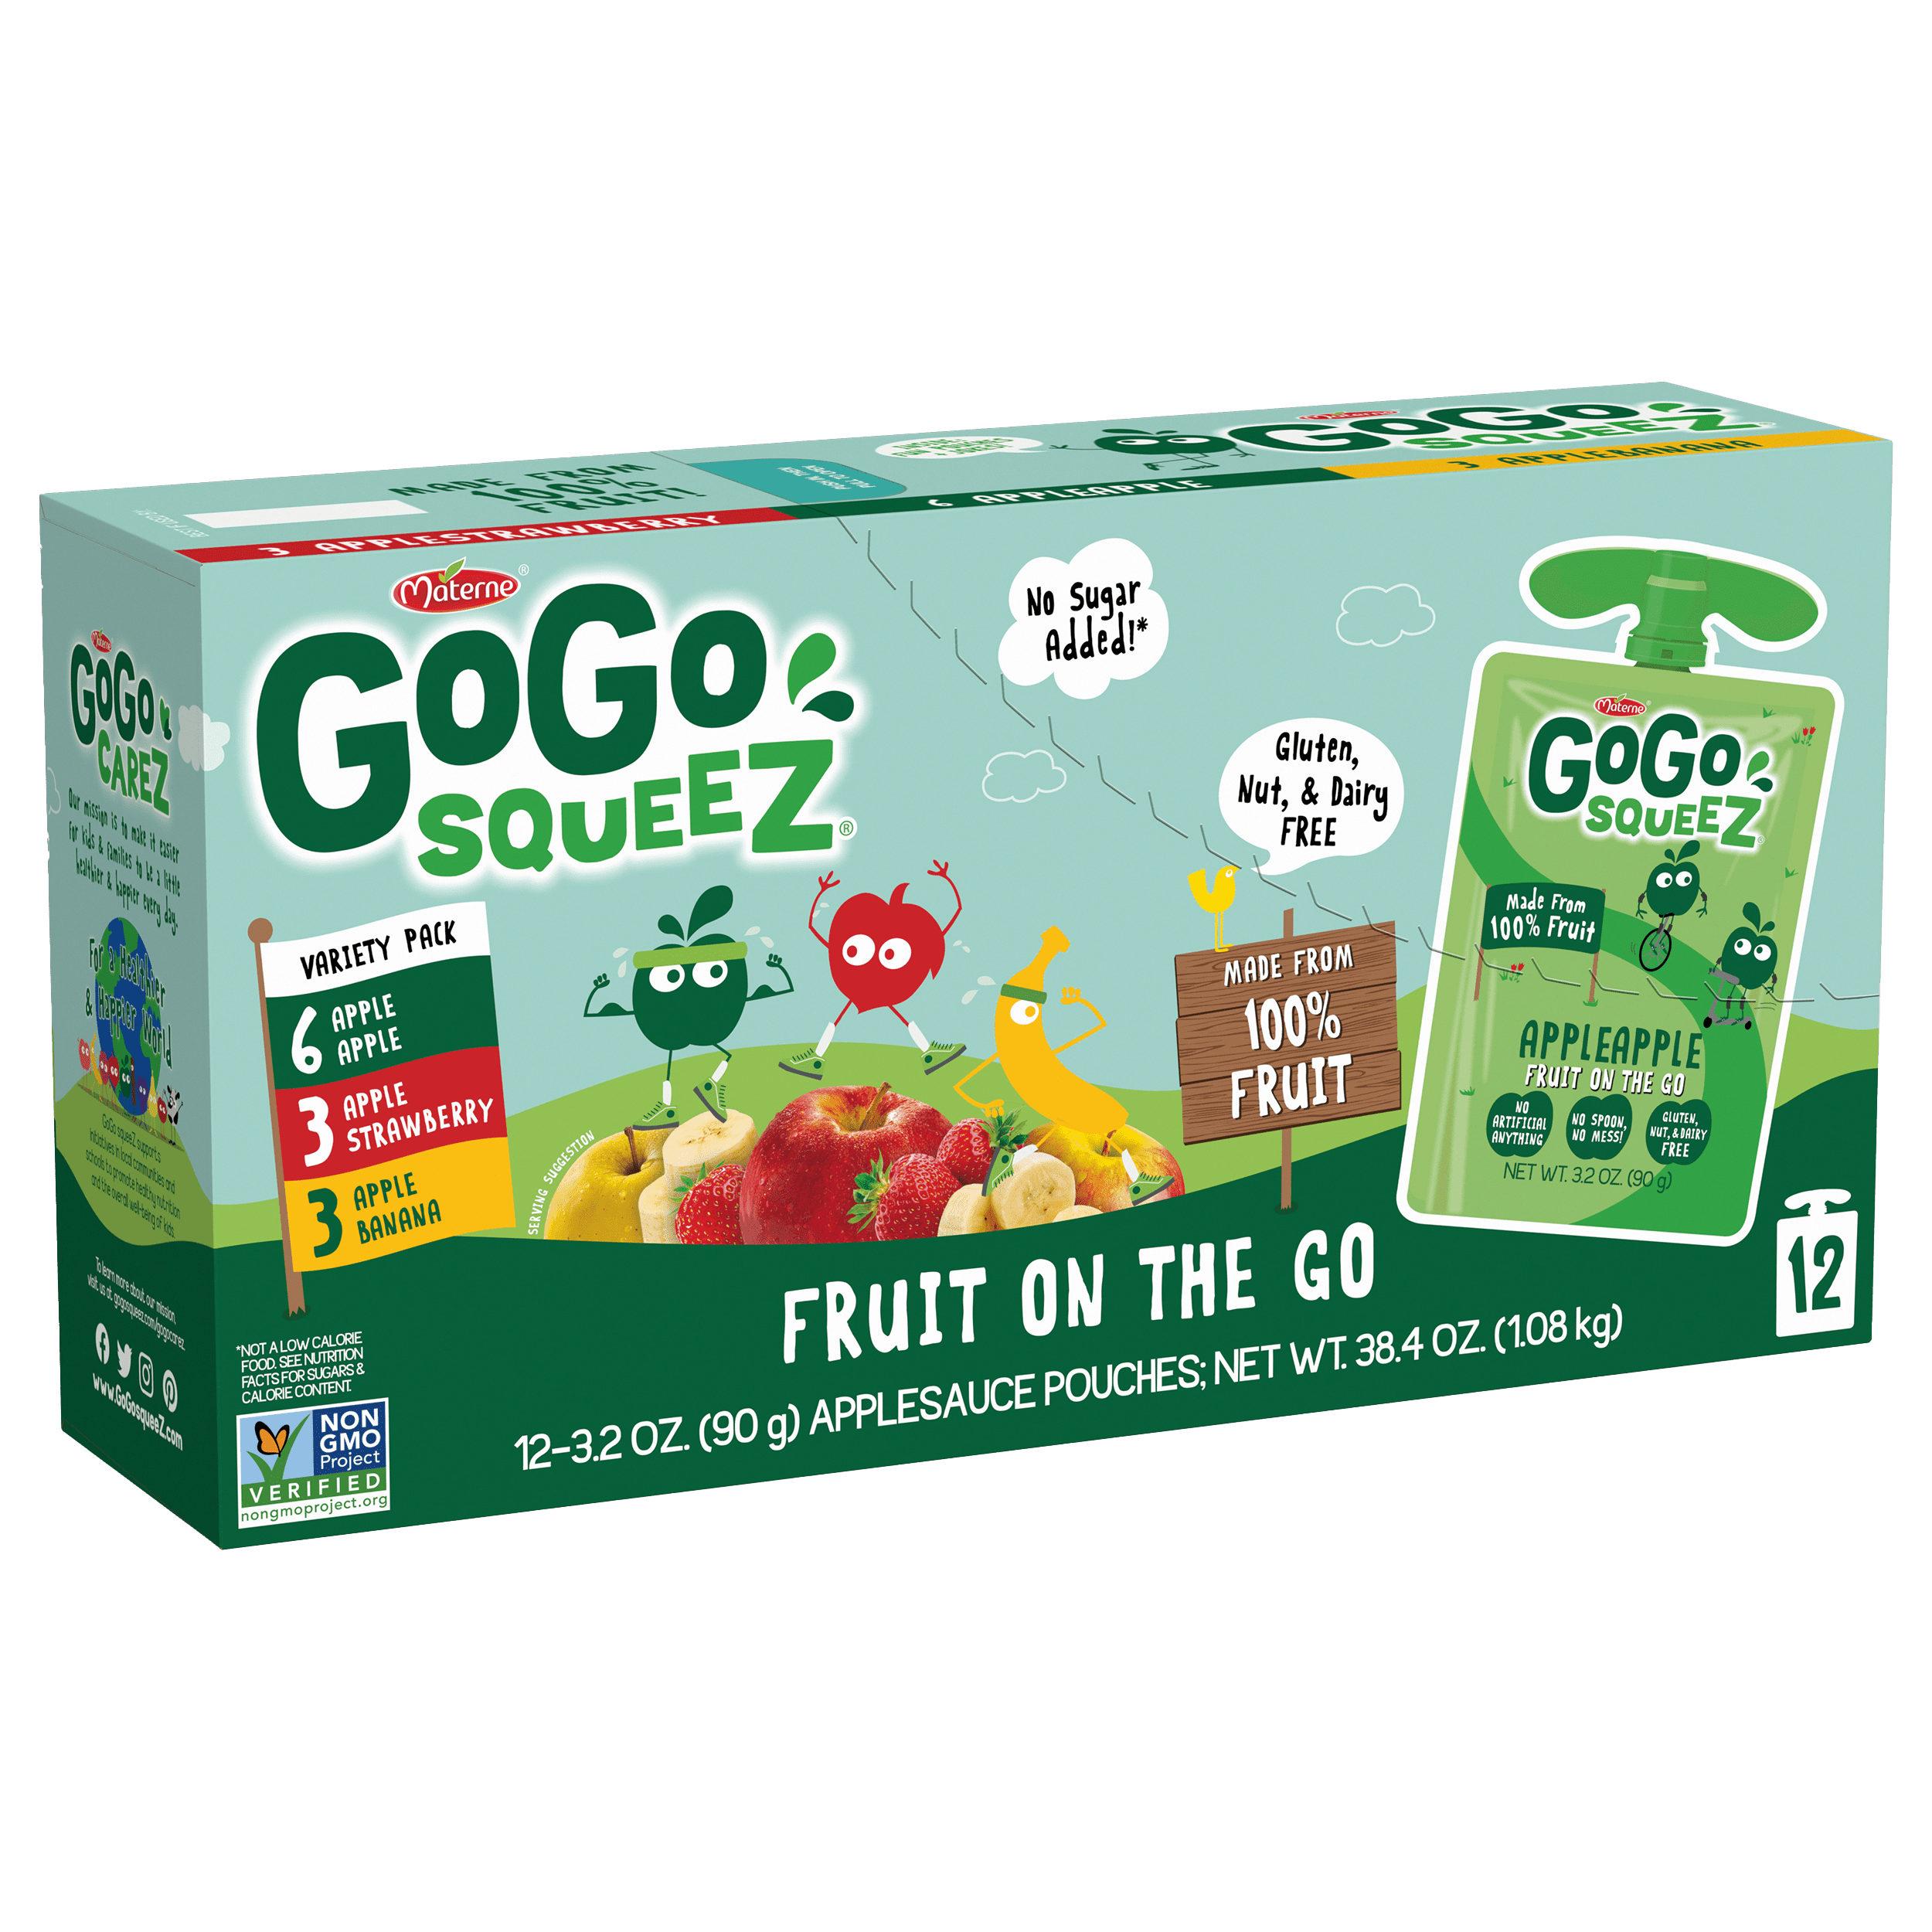 Gogo Squeez Pouches Fruit Blend Snack Apple Apple, Apple Strawberry & Apple Banana 12 pack Variety Pack Box